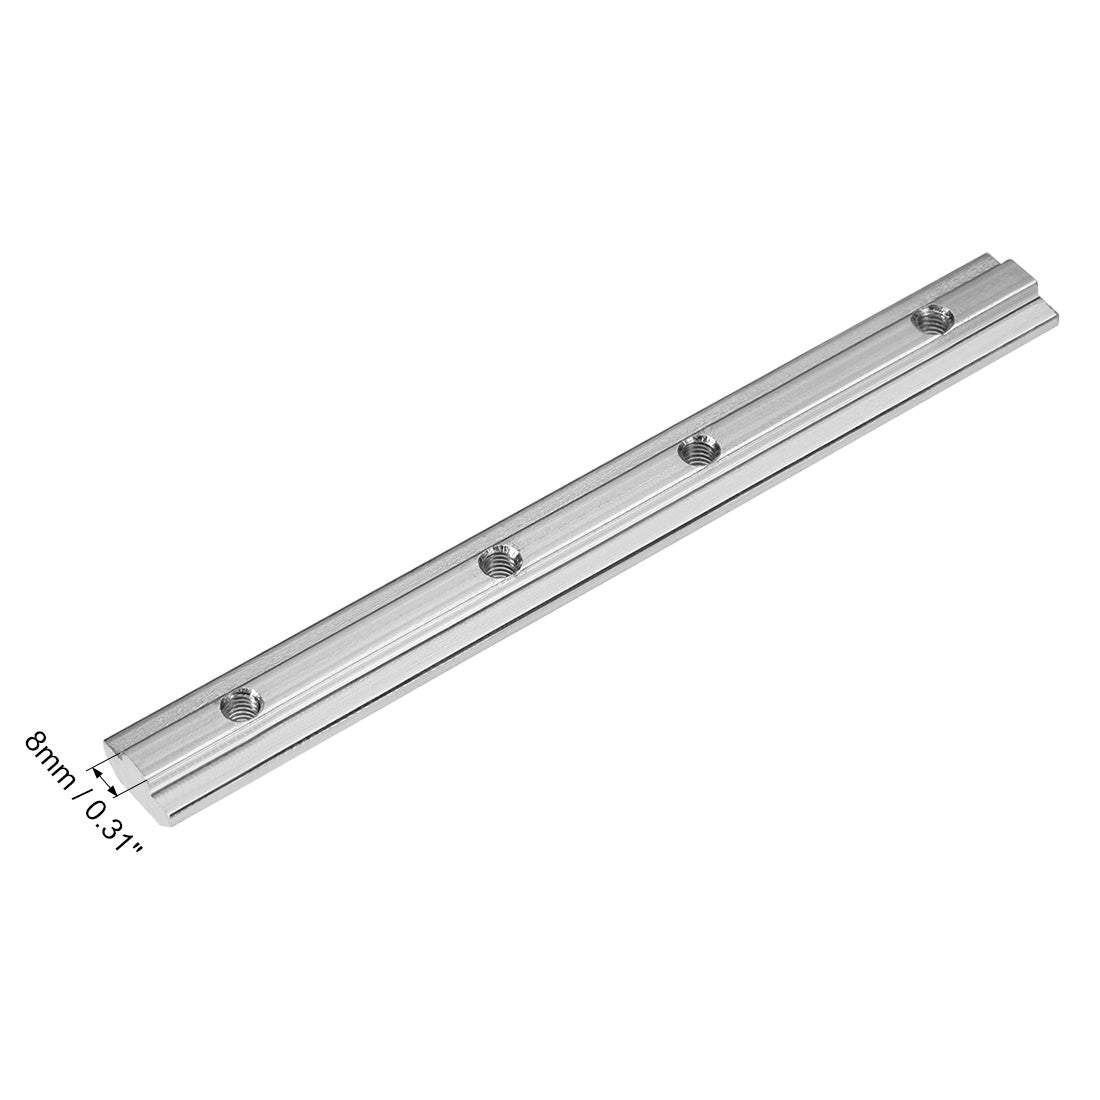 uxcell Uxcell Straight Line Connector, 7 Inch Joint Bracket with Screws for 4040 Series T Slot 8mm Aluminum Extrusion Profile, 4 Pcs